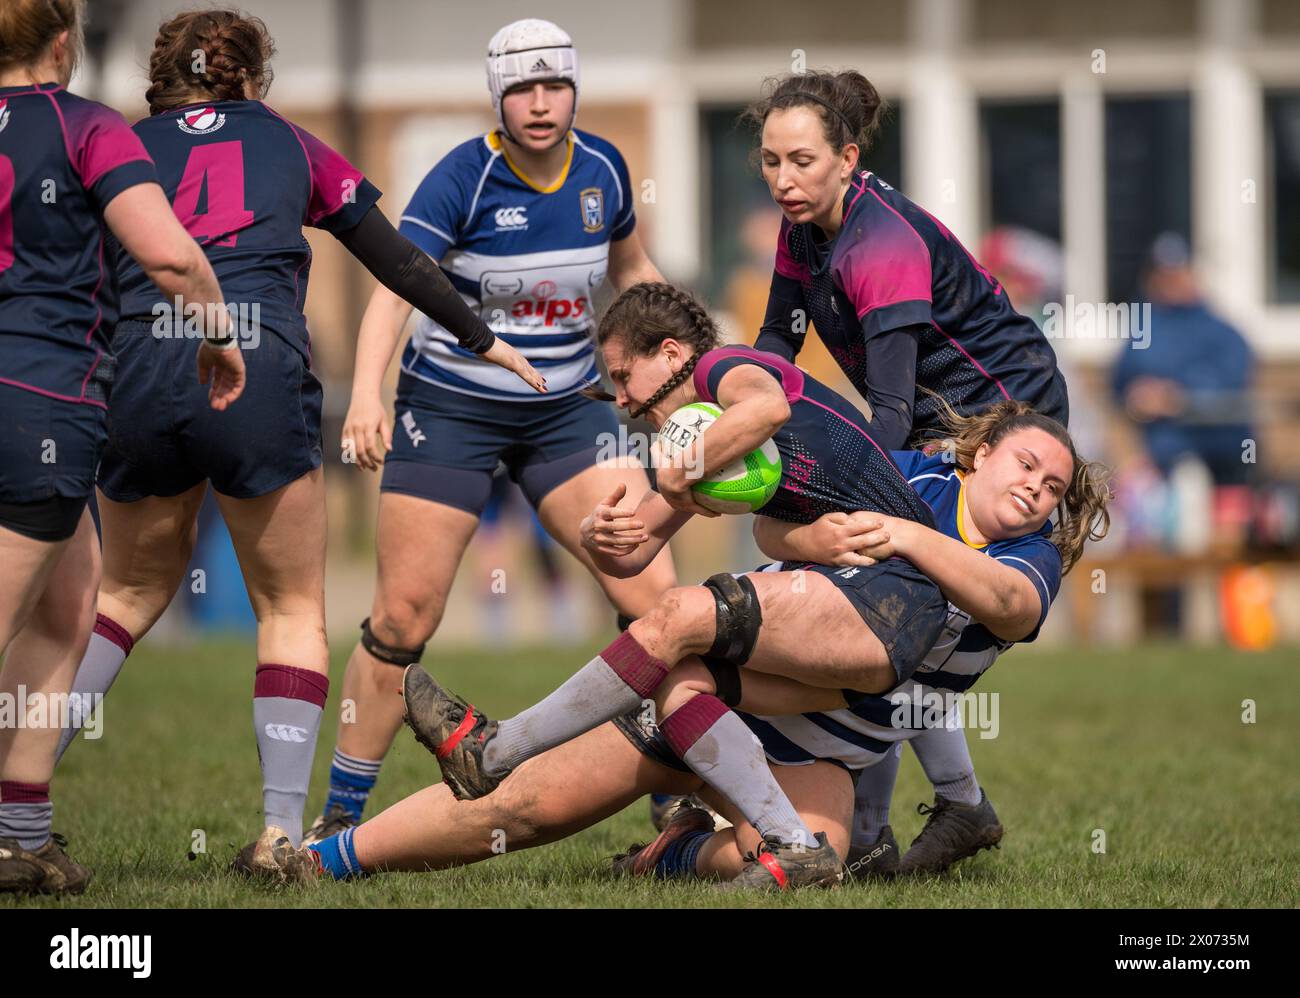 English amateur rugby union women's game. Stock Photo